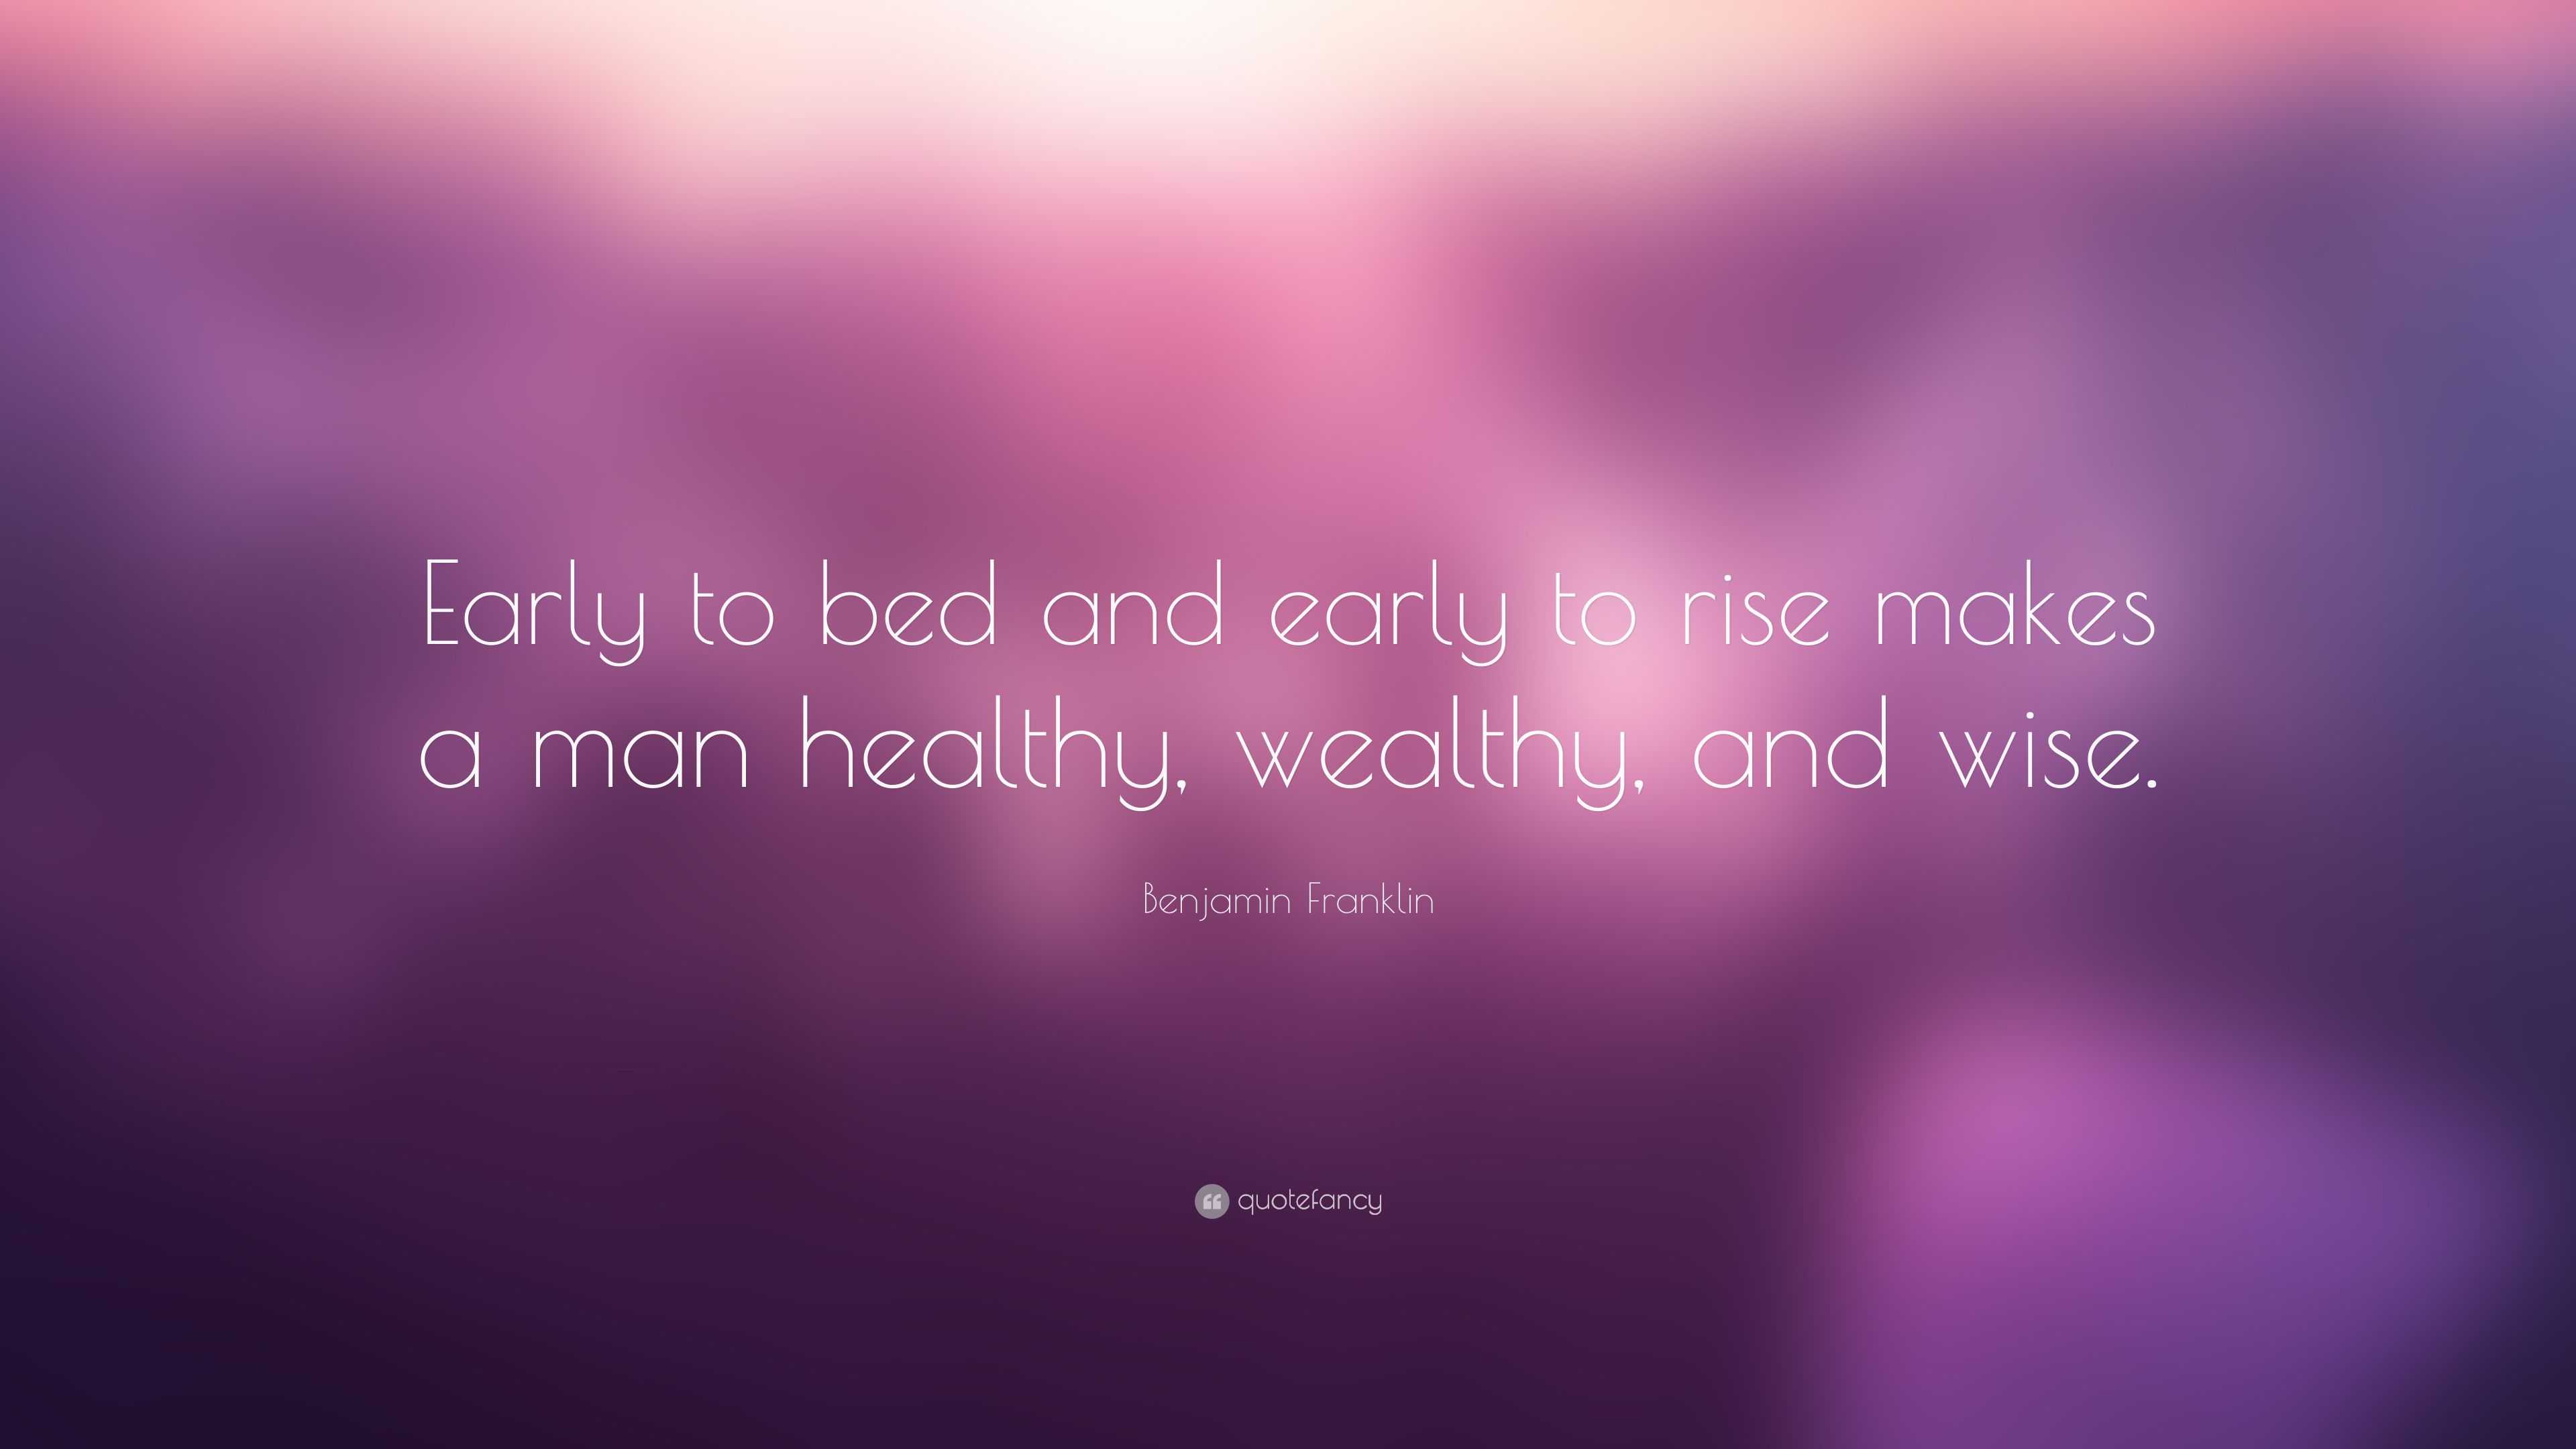 Benjamin Franklin Quote: “Early to bed and early to rise makes a man